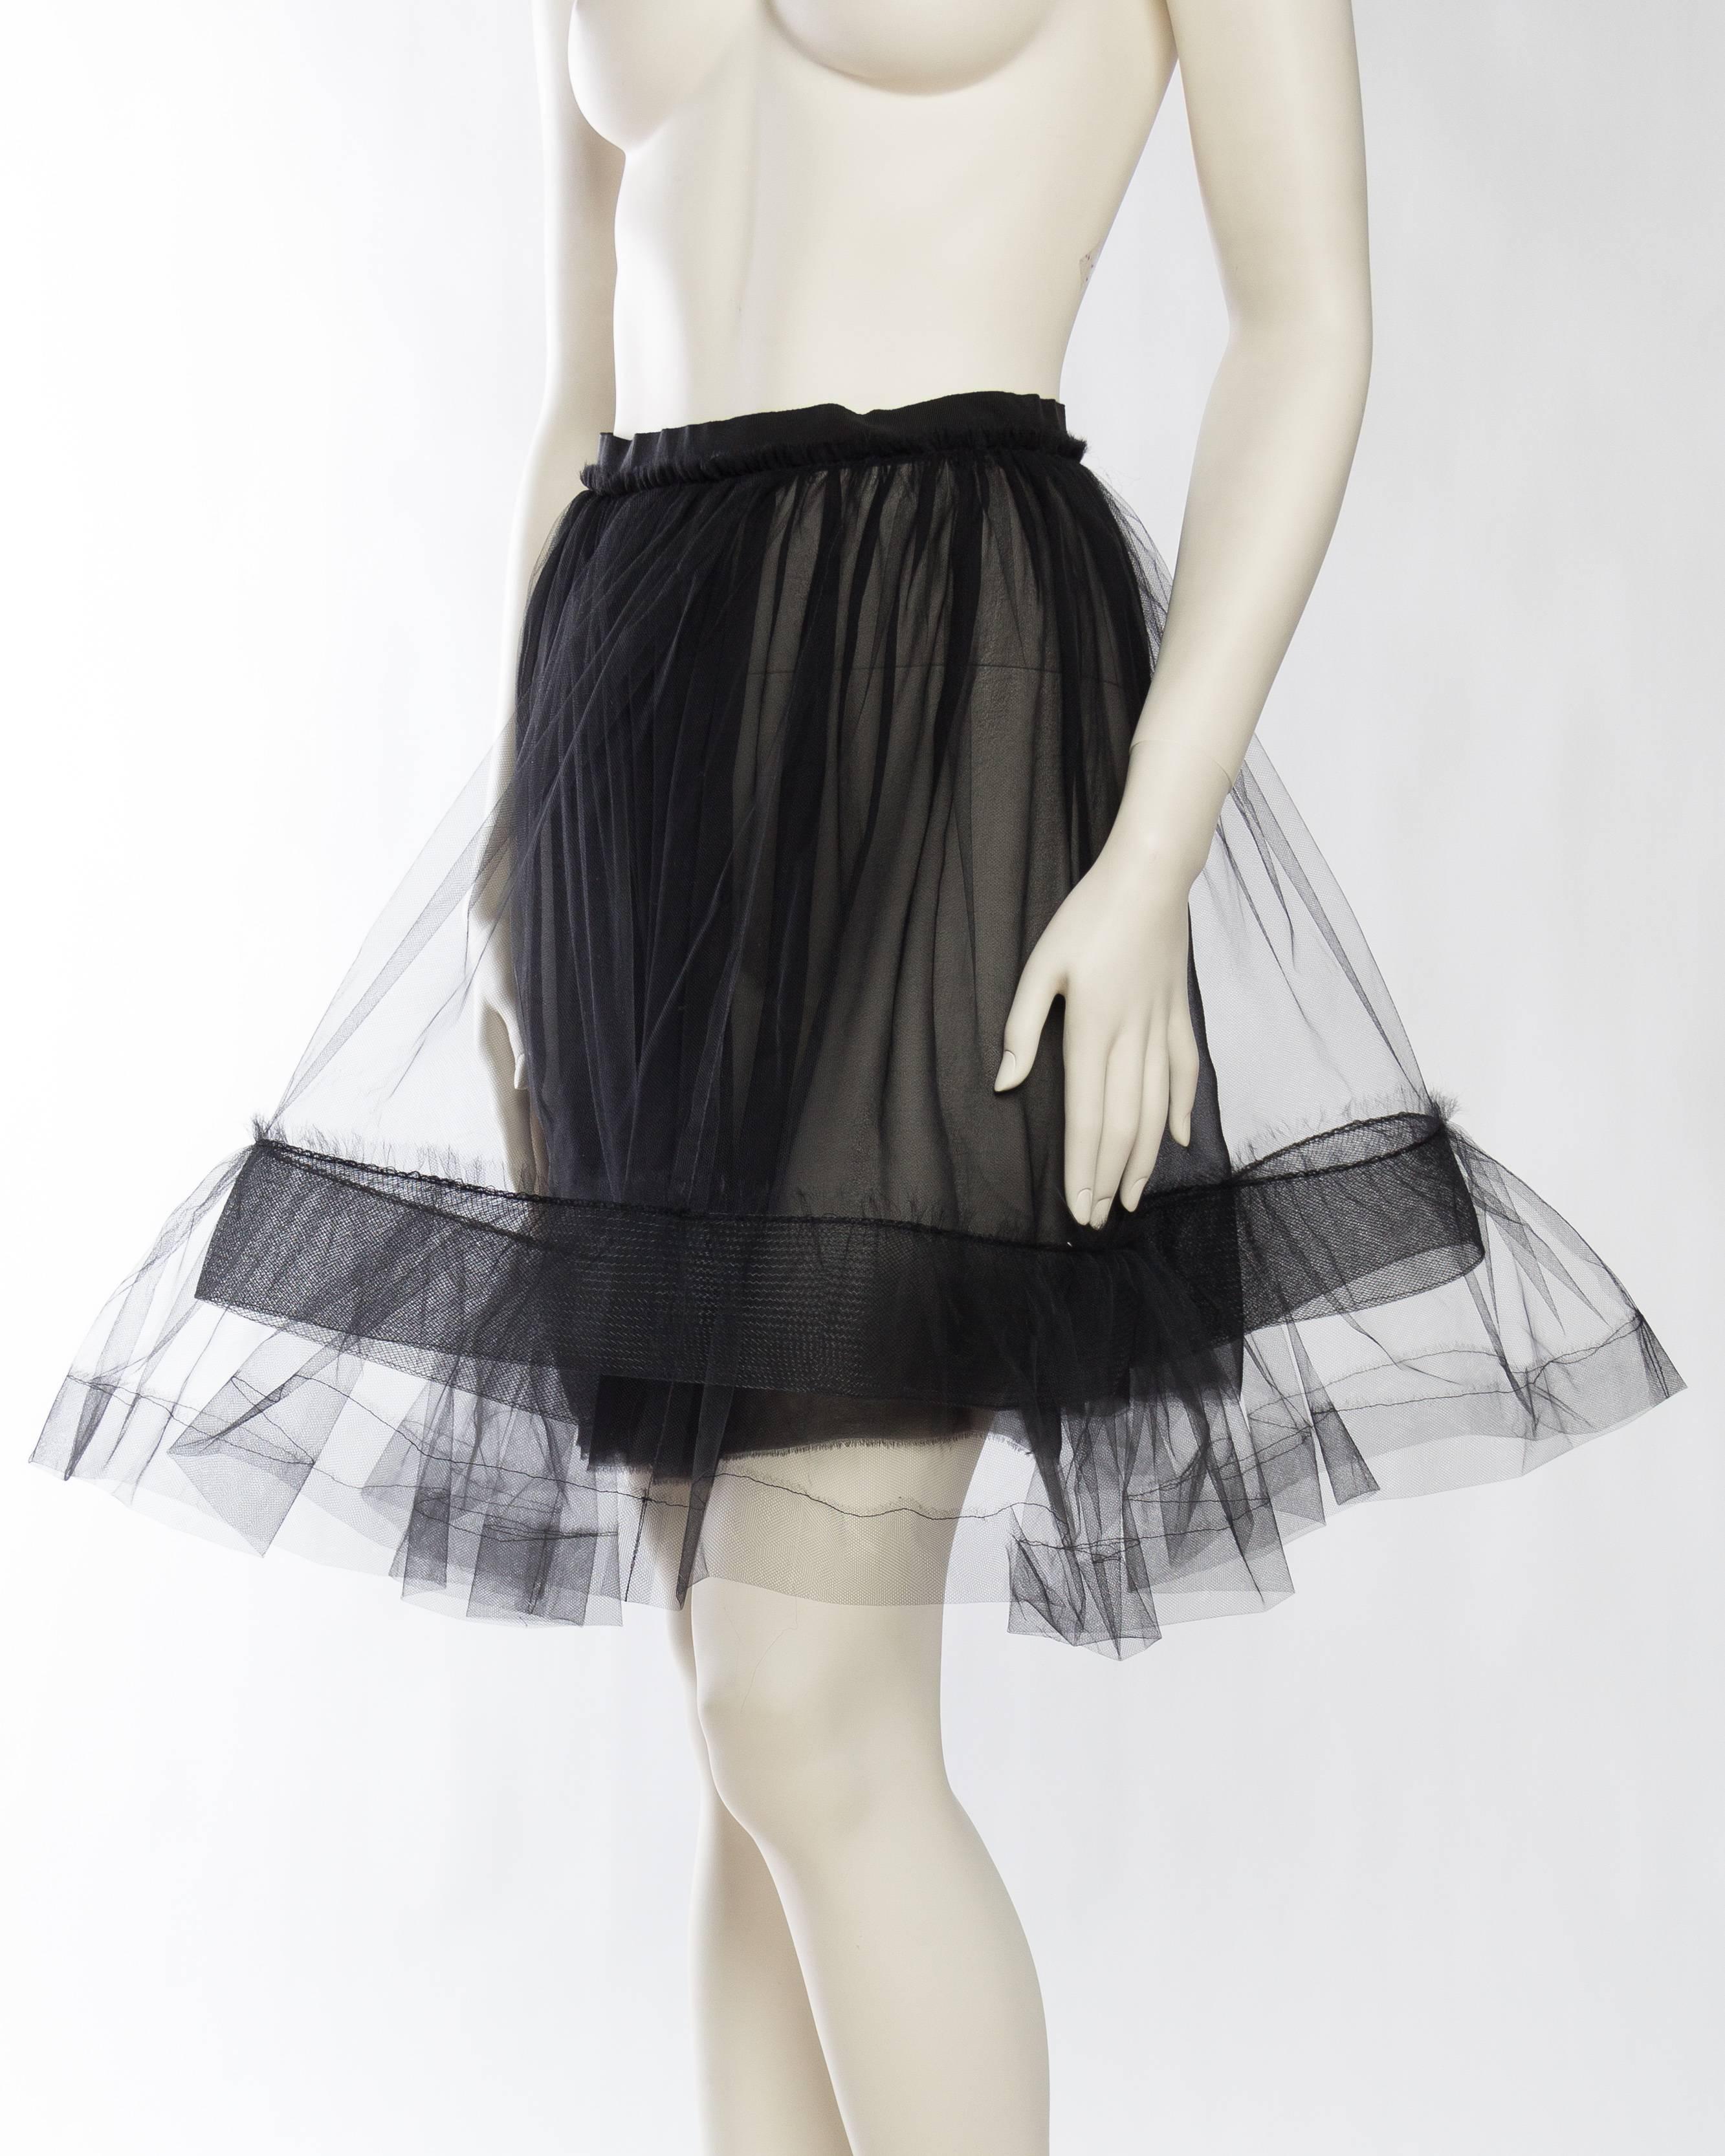 Lanvin Sheer Tulle and Chiffon Skirt In Excellent Condition In New York, NY